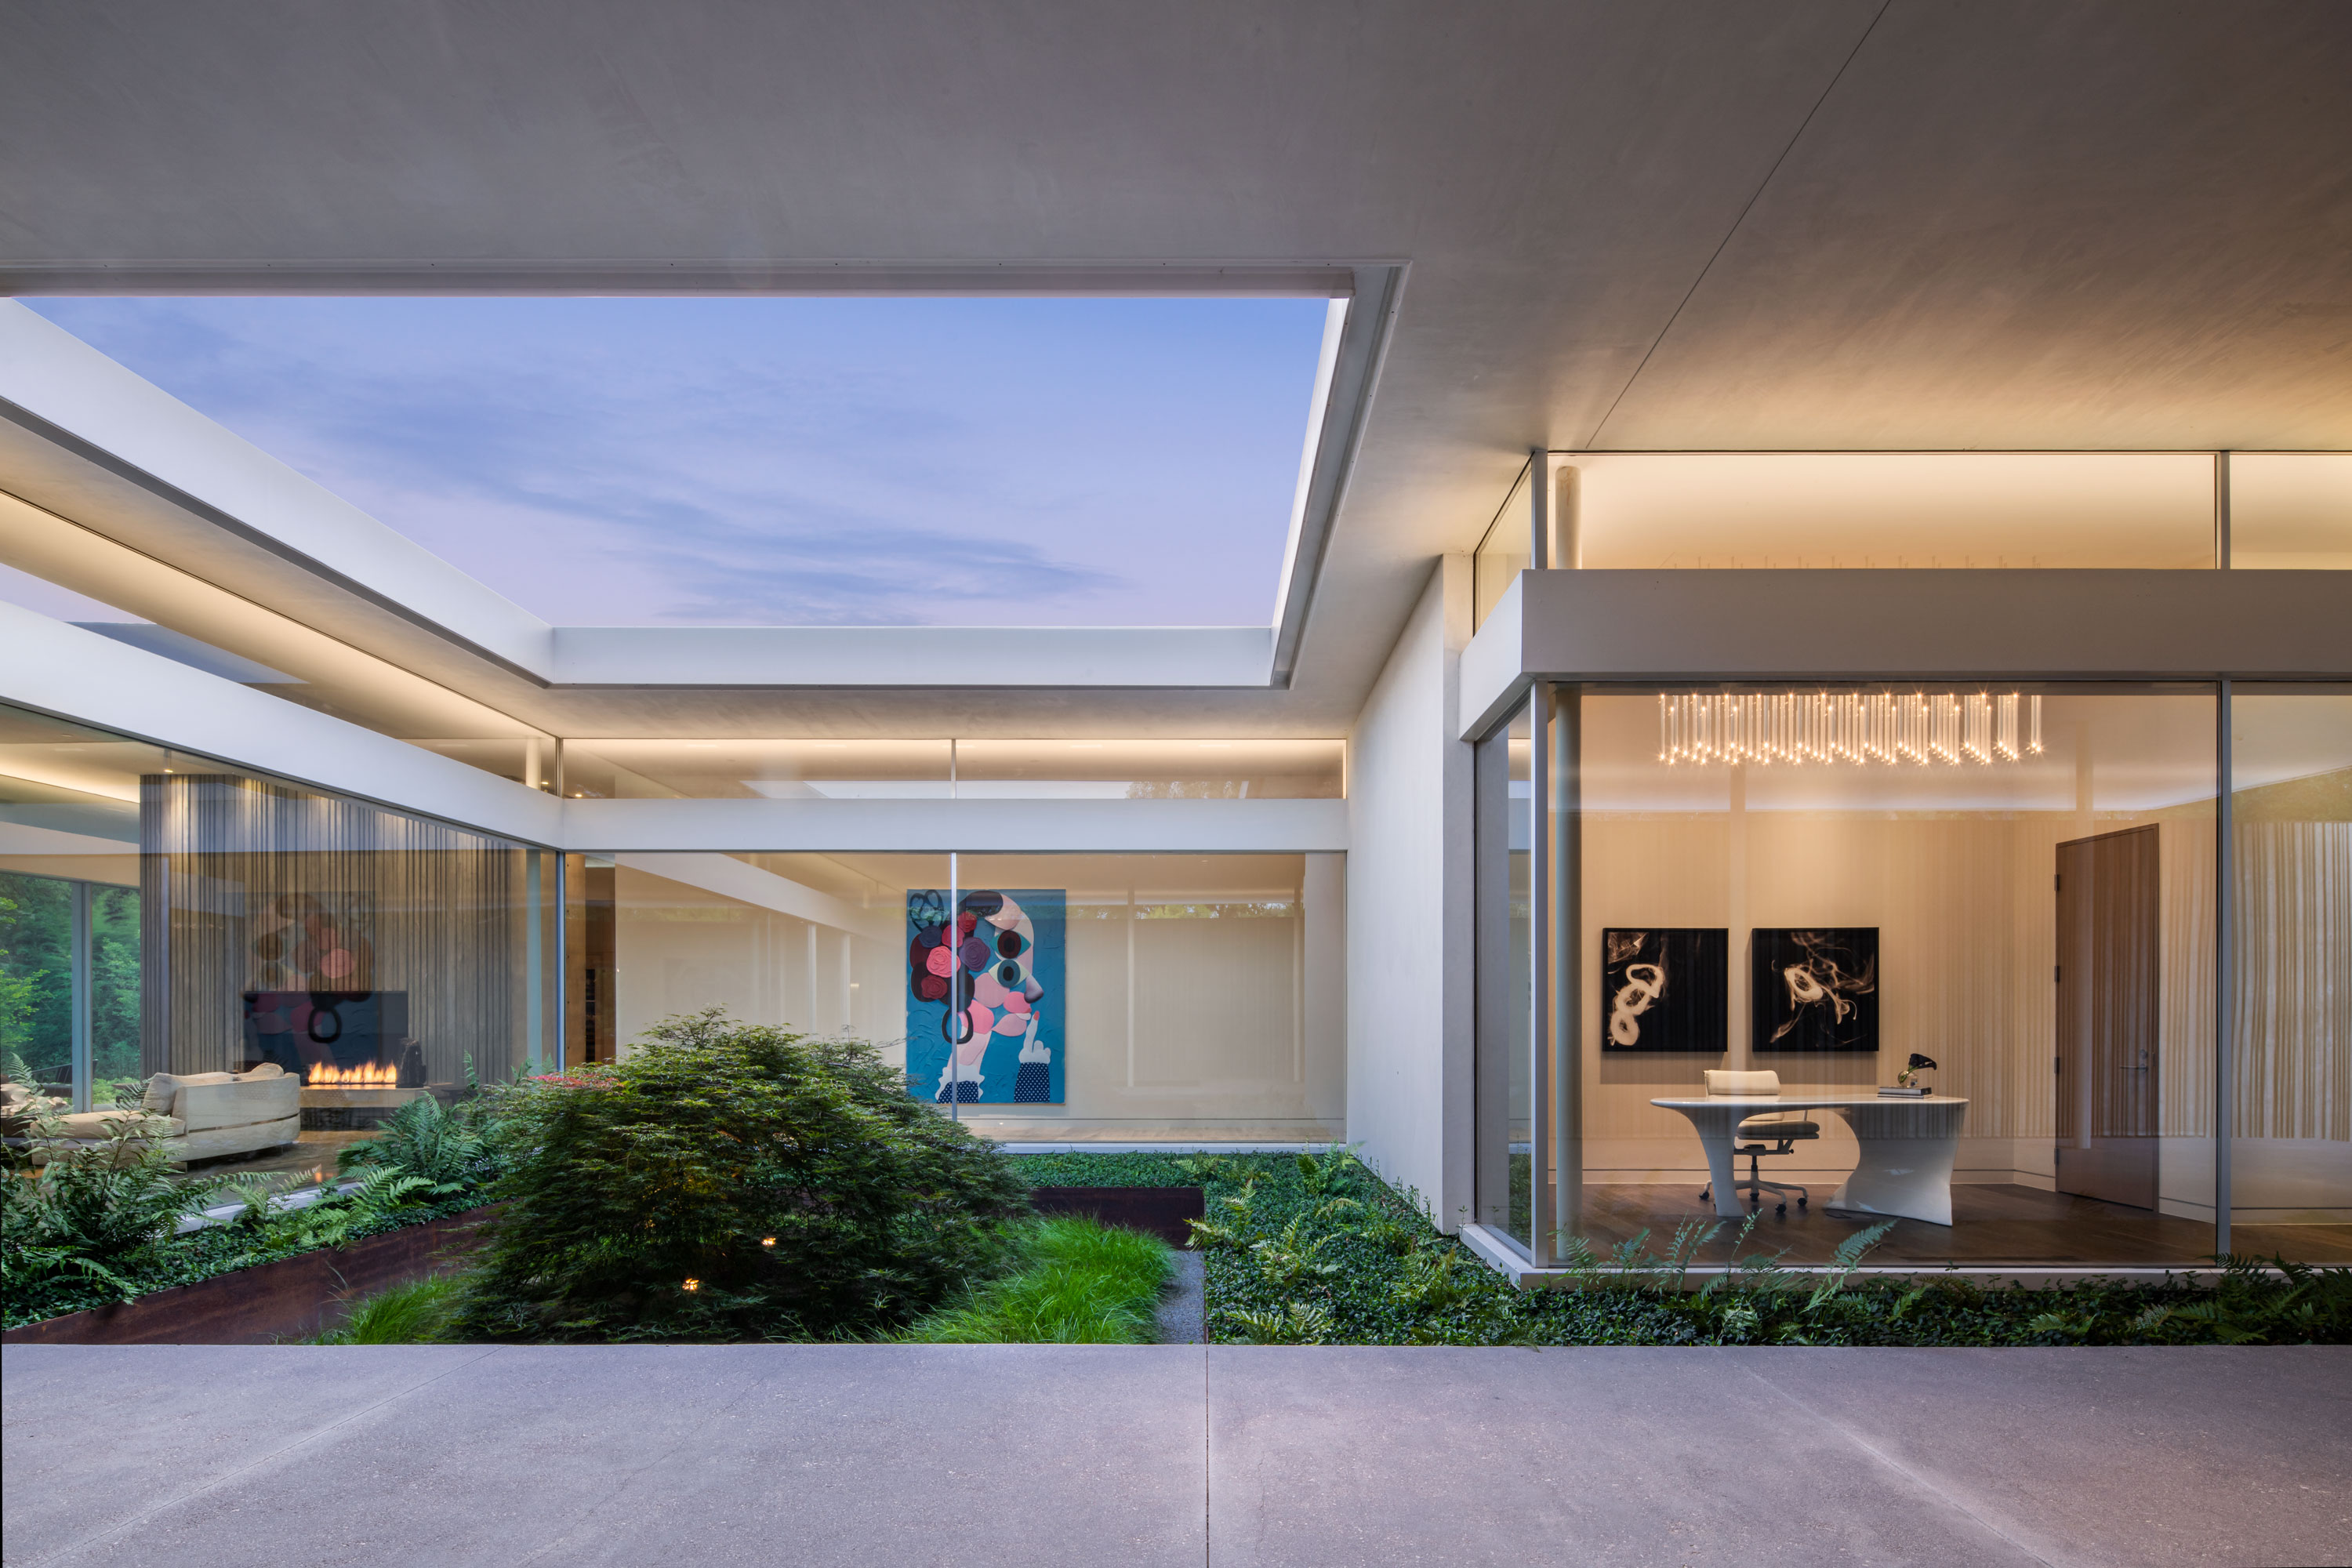 Interior photo of the Preston Hollow Residence by Specht Novak Architects. Shot in the afternoon by Manolo Langis, featuringo a living space, hallway, and office space with views of an indoor garden with open ceiling.